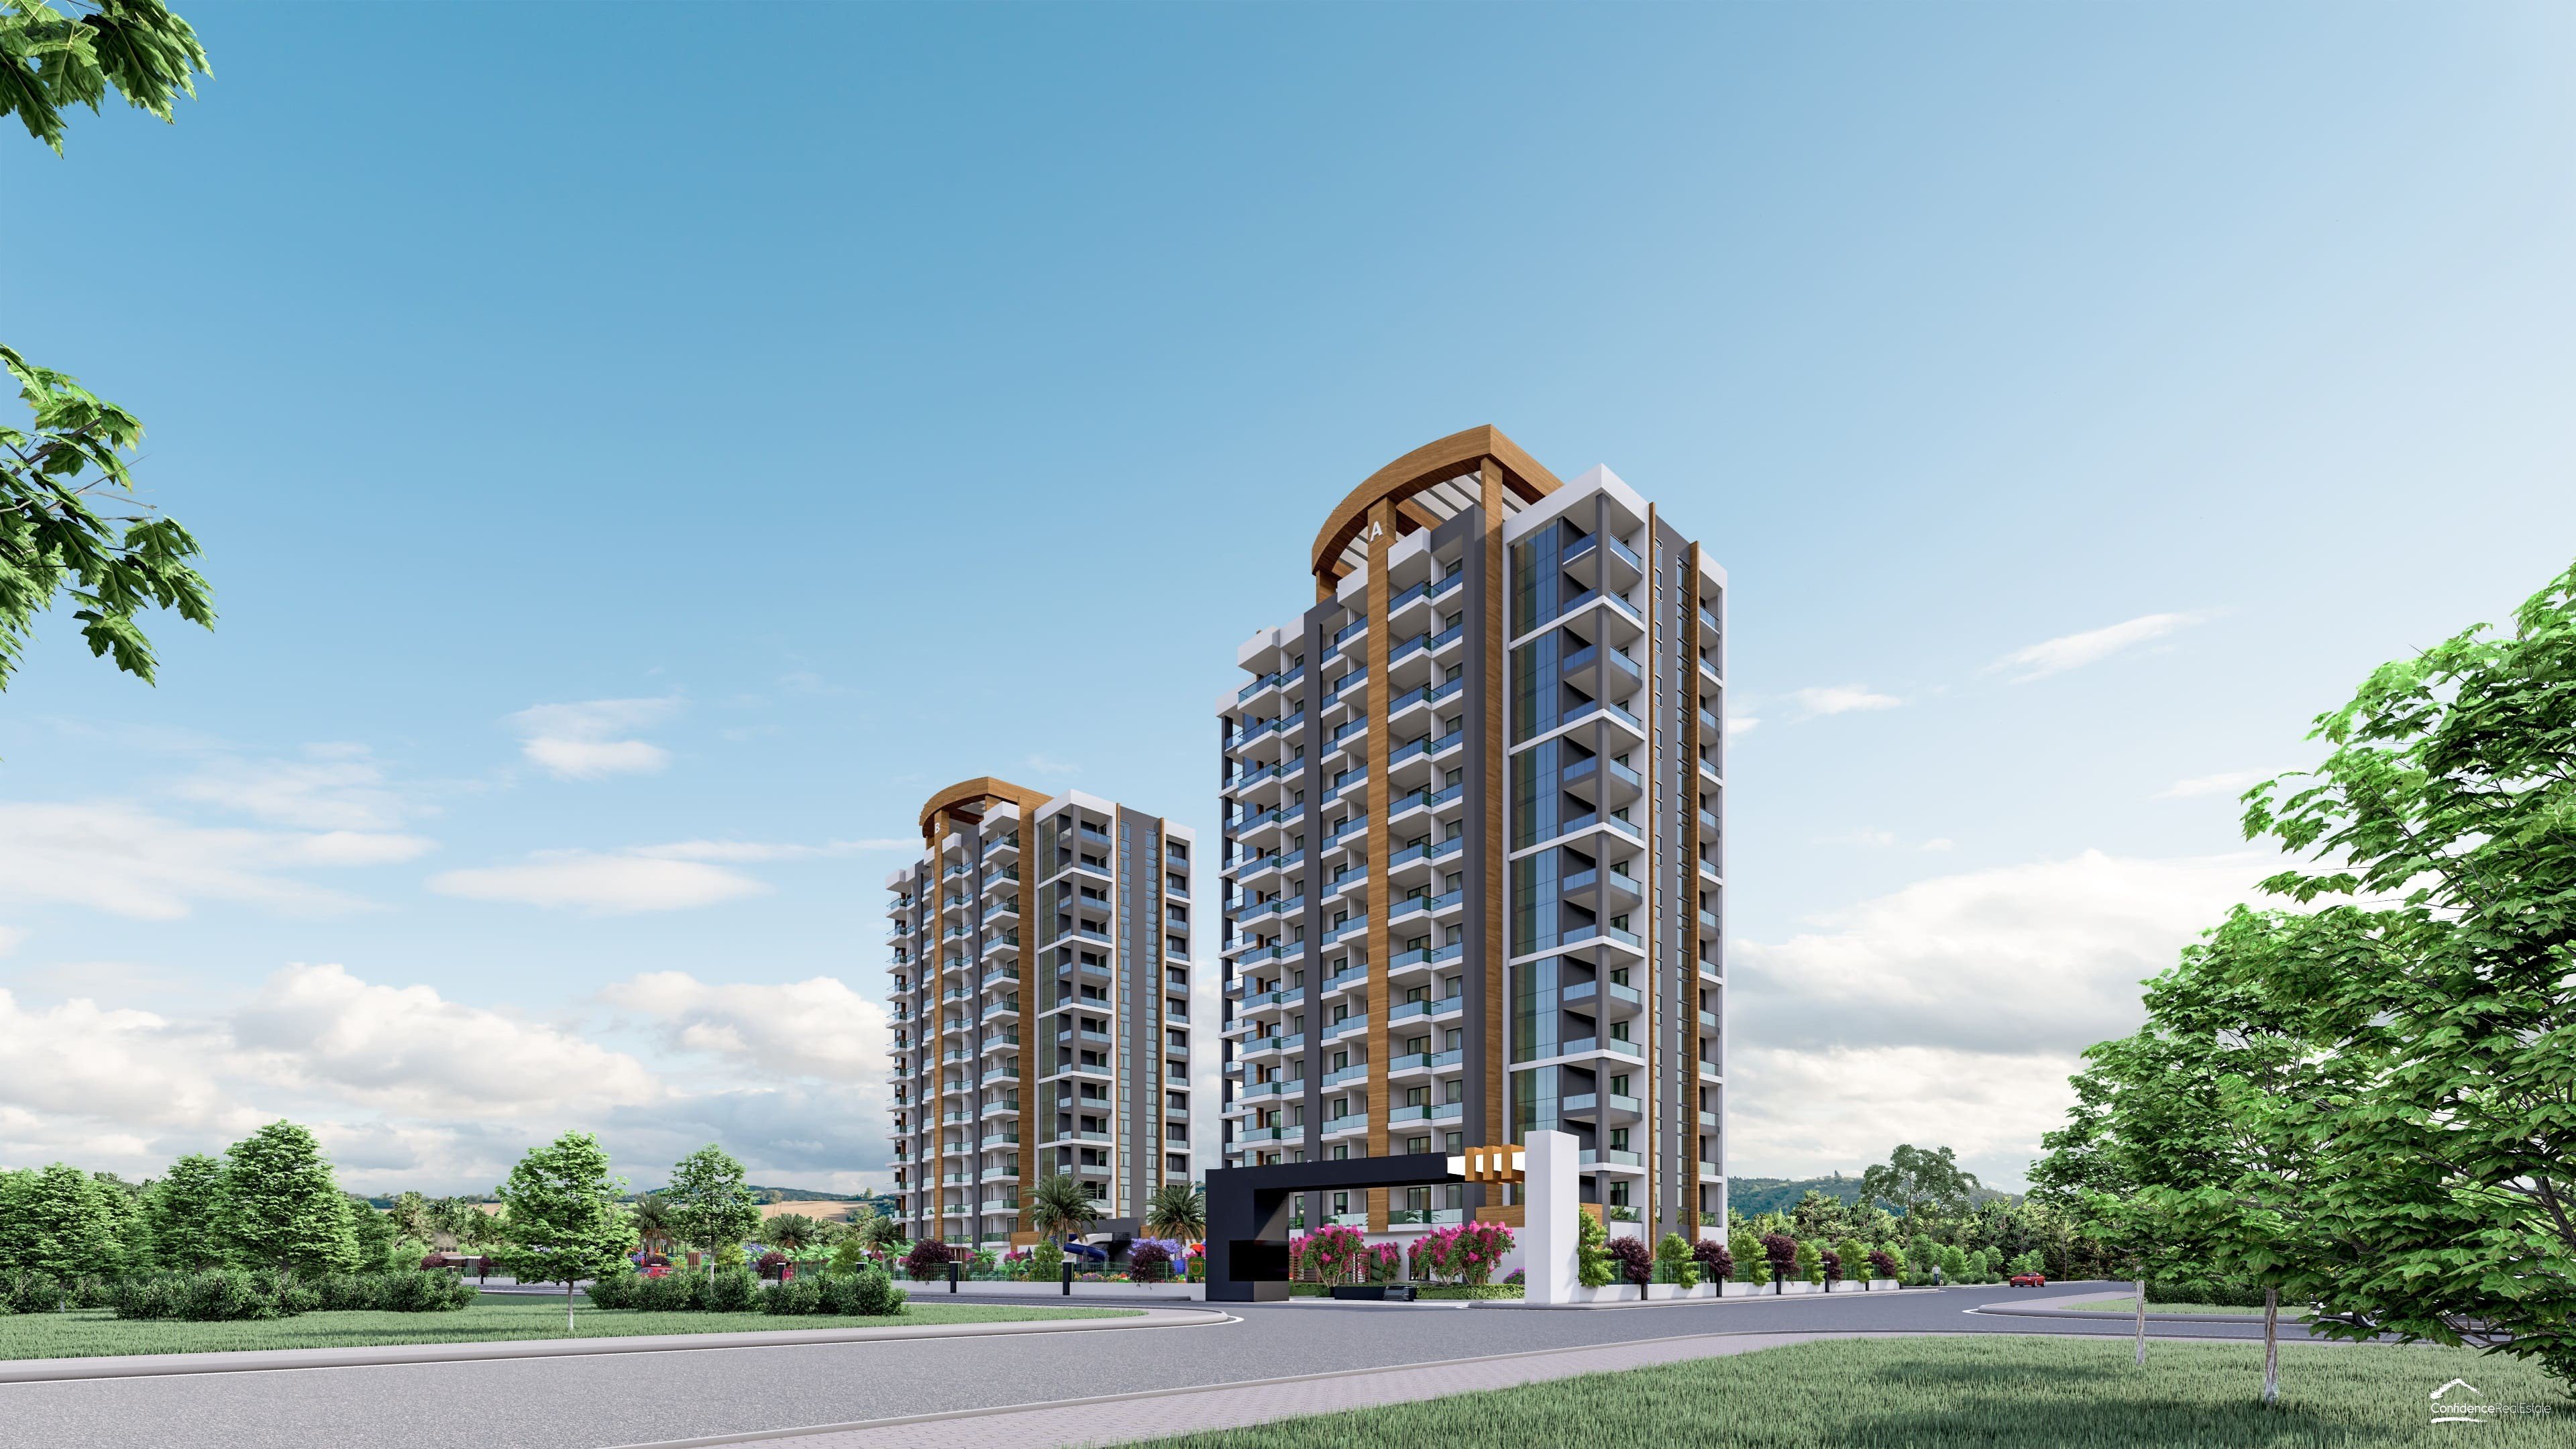 Project of a residential complex under construction in Mersin just 400 meters from the sea